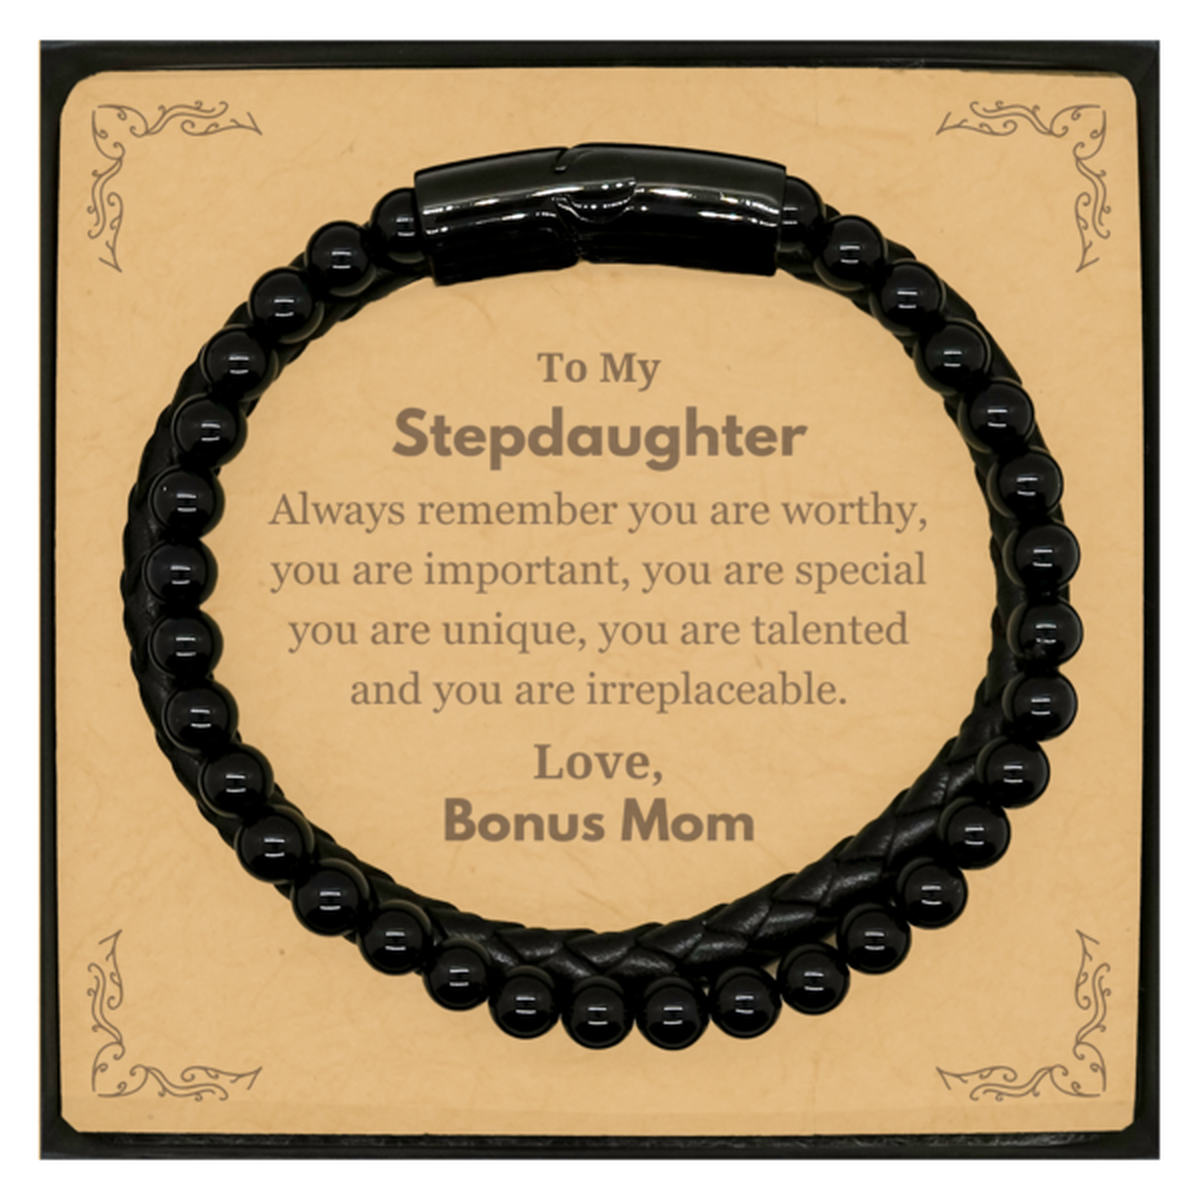 Stepdaughter Birthday Gifts from Bonus Mom, Inspirational Stone Leather Bracelets for Stepdaughter Christmas Graduation Gifts for Stepdaughter Always remember you are worthy, you are important. Love, Bonus Mom